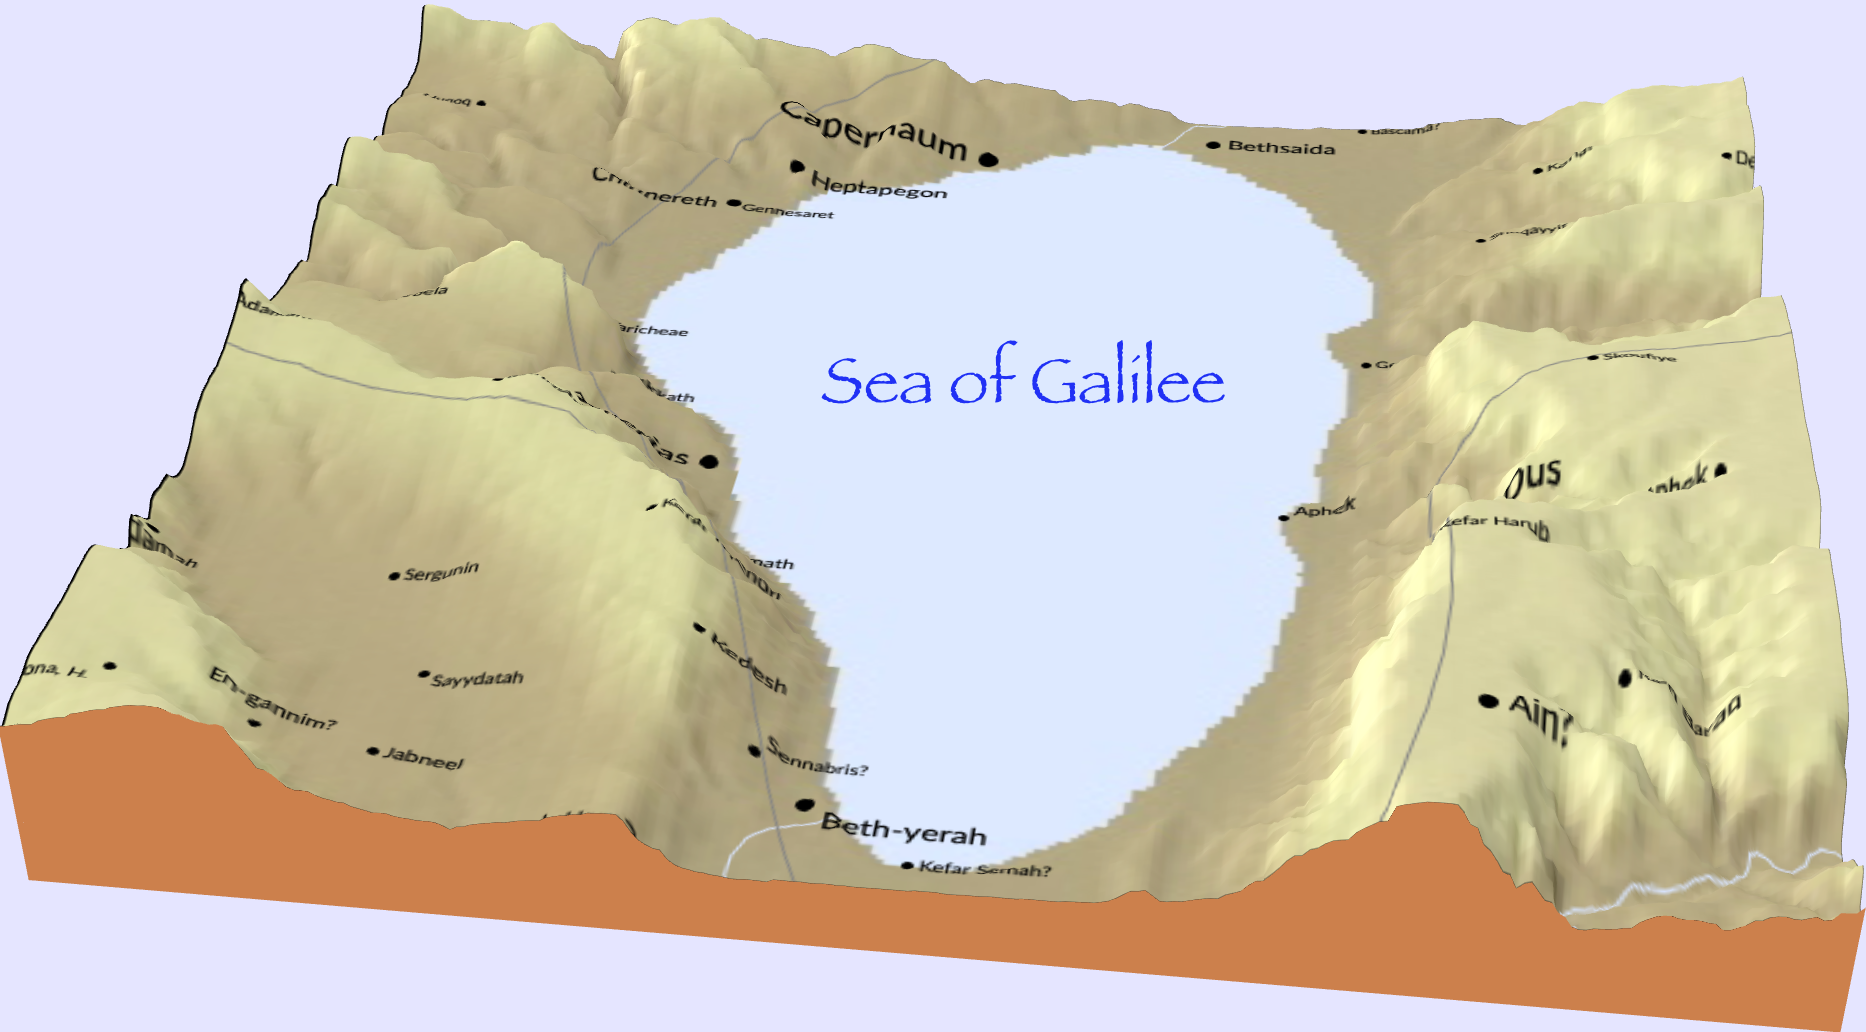 A topographical map of the Sea of Galilee.